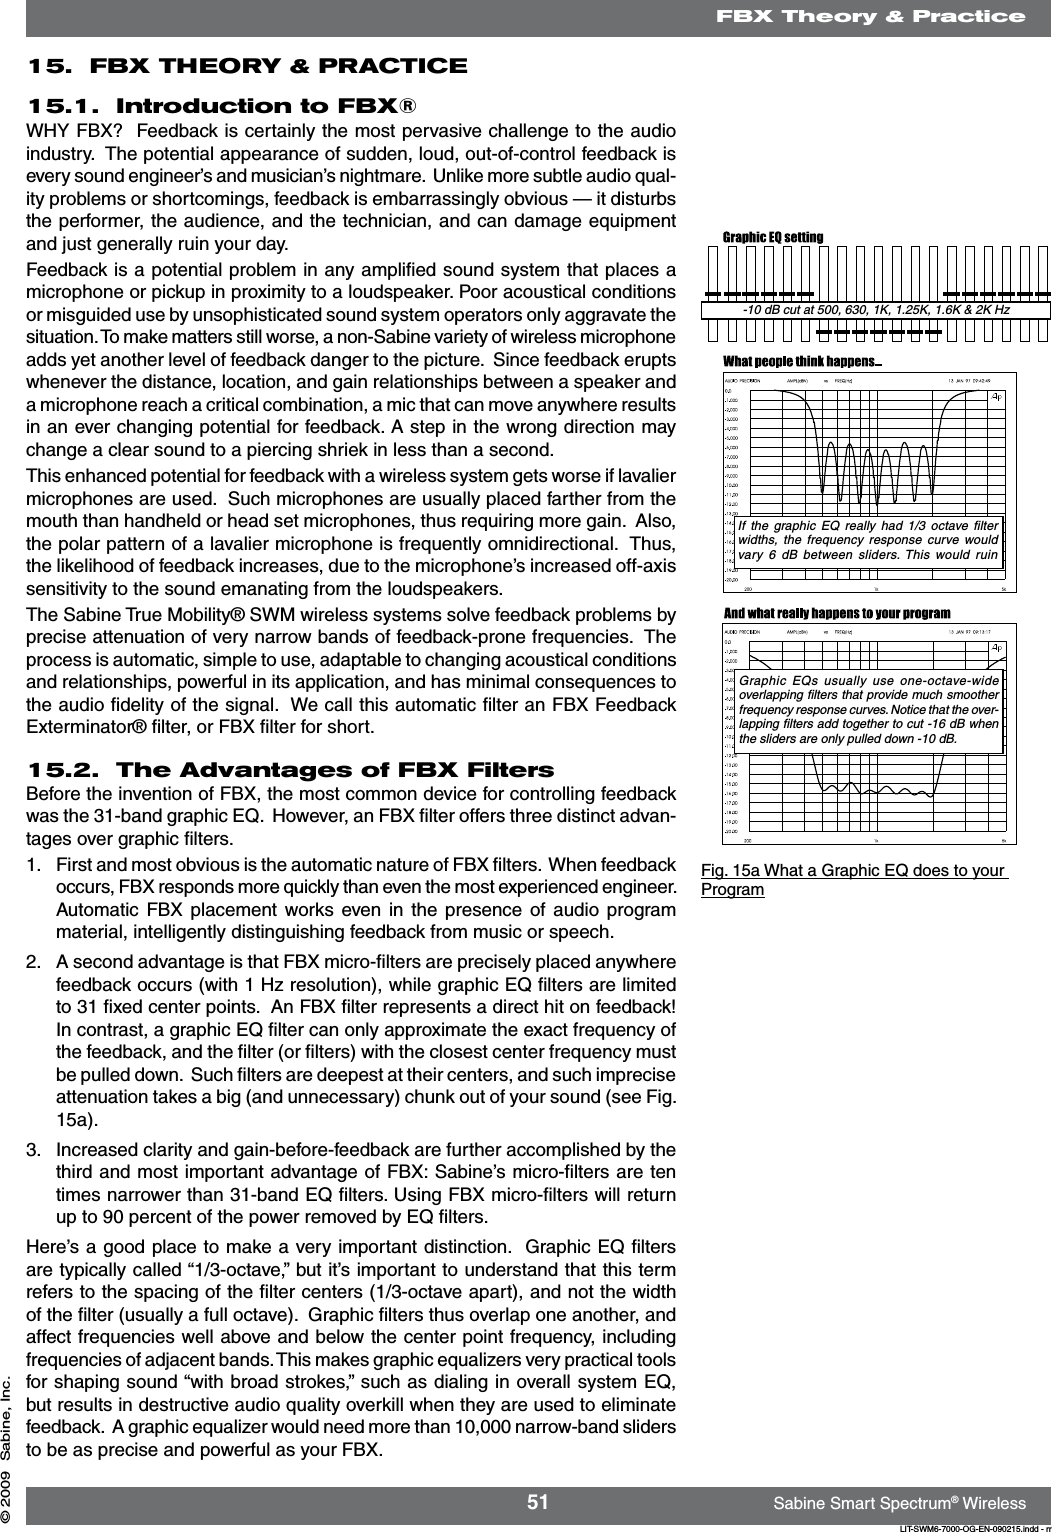 51 Sabine Smart Spectrum® WirelessLIT-SWM6-7000-OG-EN-090215.indd - rr© 2009  Sabine, Inc.15.  FBX THEORY &amp; PRACTICE15.1.  Introduction to FBX®WHY FBX?  Feedback is certainly the most pervasive challenge to the audio industry.  The potential appearance of sudden, loud, out-of-control feedback is every sound engineer’s and musician’s nightmare.  Unlike more subtle audio qual-ity problems or shortcomings, feedback is embarrassingly obvious — it disturbs the performer, the audience, and the technician, and can damage equipment and just generally ruin your day.  Feedback is a potential problem in any ampliﬁed sound system that places a microphone or pickup in proximity to a loudspeaker. Poor acoustical conditions or misguided use by unsophisticated sound system operators only aggravate the situation. To make matters still worse, a non-Sabine variety of wireless microphone adds yet another level of feedback danger to the picture.  Since feedback erupts whenever the distance, location, and gain relationships between a speaker and a microphone reach a critical combination, a mic that can move anywhere results in an ever changing potential for feedback. A step in the wrong direction may change a clear sound to a piercing shriek in less than a second.  This enhanced potential for feedback with a wireless system gets worse if lavalier microphones are used.  Such microphones are usually placed farther from the mouth than handheld or head set microphones, thus requiring more gain.  Also, the polar pattern of a lavalier microphone is frequently omnidirectional.  Thus, the likelihood of feedback increases, due to the microphone’s increased off-axis sensitivity to the sound emanating from the loudspeakers.The Sabine True Mobility® SWM wireless systems solve feedback problems by precise attenuation of very narrow bands of feedback-prone frequencies.  The process is automatic, simple to use, adaptable to changing acoustical conditions and relationships, powerful in its application, and has minimal consequences to the audio ﬁdelity of the signal.  We call this automatic ﬁlter an FBX Feedback Exterminator® ﬁlter, or FBX ﬁlter for short.15.2.  The Advantages of FBX Filters  Before the invention of FBX, the most common device for controlling feedback was the 31-band graphic EQ.  However, an FBX ﬁlter offers three distinct advan-tages over graphic ﬁlters. 1.  First and most obvious is the automatic nature of FBX ﬁlters.  When feedback occurs, FBX responds more quickly than even the most experienced engineer. Automatic FBX placement works even in the  presence  of  audio  program material, intelligently distinguishing feedback from music or speech.2.  A second advantage is that FBX micro-ﬁlters are precisely placed anywhere feedback occurs (with 1 Hz resolution), while graphic EQ ﬁlters are limited to 31 ﬁxed center points.  An FBX ﬁlter represents a direct hit on feedback!   In contrast, a graphic EQ ﬁlter can only approximate the exact frequency of the feedback, and the ﬁlter (or ﬁlters) with the closest center frequency must be pulled down.  Such ﬁlters are deepest at their centers, and such imprecise attenuation takes a big (and unnecessary) chunk out of your sound (see Fig. 15a). 3.  Increased clarity and gain-before-feedback are further accomplished by the third and most important advantage of FBX: Sabine’s micro-ﬁlters are ten times narrower than 31-band EQ ﬁlters. Using FBX micro-ﬁlters will return up to 90 percent of the power removed by EQ ﬁlters.  Here’s a good place to make a very important distinction.  Graphic EQ ﬁlters are typically called “1/3-octave,” but it’s important to understand that this term refers to the spacing of the ﬁlter centers (1/3-octave apart), and not the width of the ﬁlter (usually a full octave).  Graphic ﬁlters thus overlap one another, and affect frequencies well above and below the center point frequency, including frequencies of adjacent bands. This makes graphic equalizers very practical tools for shaping sound “with broad strokes,” such as dialing in overall system EQ, but results in destructive audio quality overkill when they are used to eliminate feedback.  A graphic equalizer would need more than 10,000 narrow-band sliders to be as precise and powerful as your FBX. -10 dB cut at 500, 630, 1K, 1.25K, 1.6K &amp; 2K HzIf  the  graphic  EQ  really  had  1/3  octave  ﬁlter widths,  the  frequency  response  curve would vary  6  dB  between  sliders. This  would  ruin Graphic  EQs  usually  use  one-octave-wide overlapping ﬁlters that provide much smoother frequency response curves. Notice that the over-lapping ﬁlters add together to cut -16 dB when the sliders are only pulled down -10 dB.Fig. 15a What a Graphic EQ does to your ProgramFBX Theory &amp; Practice